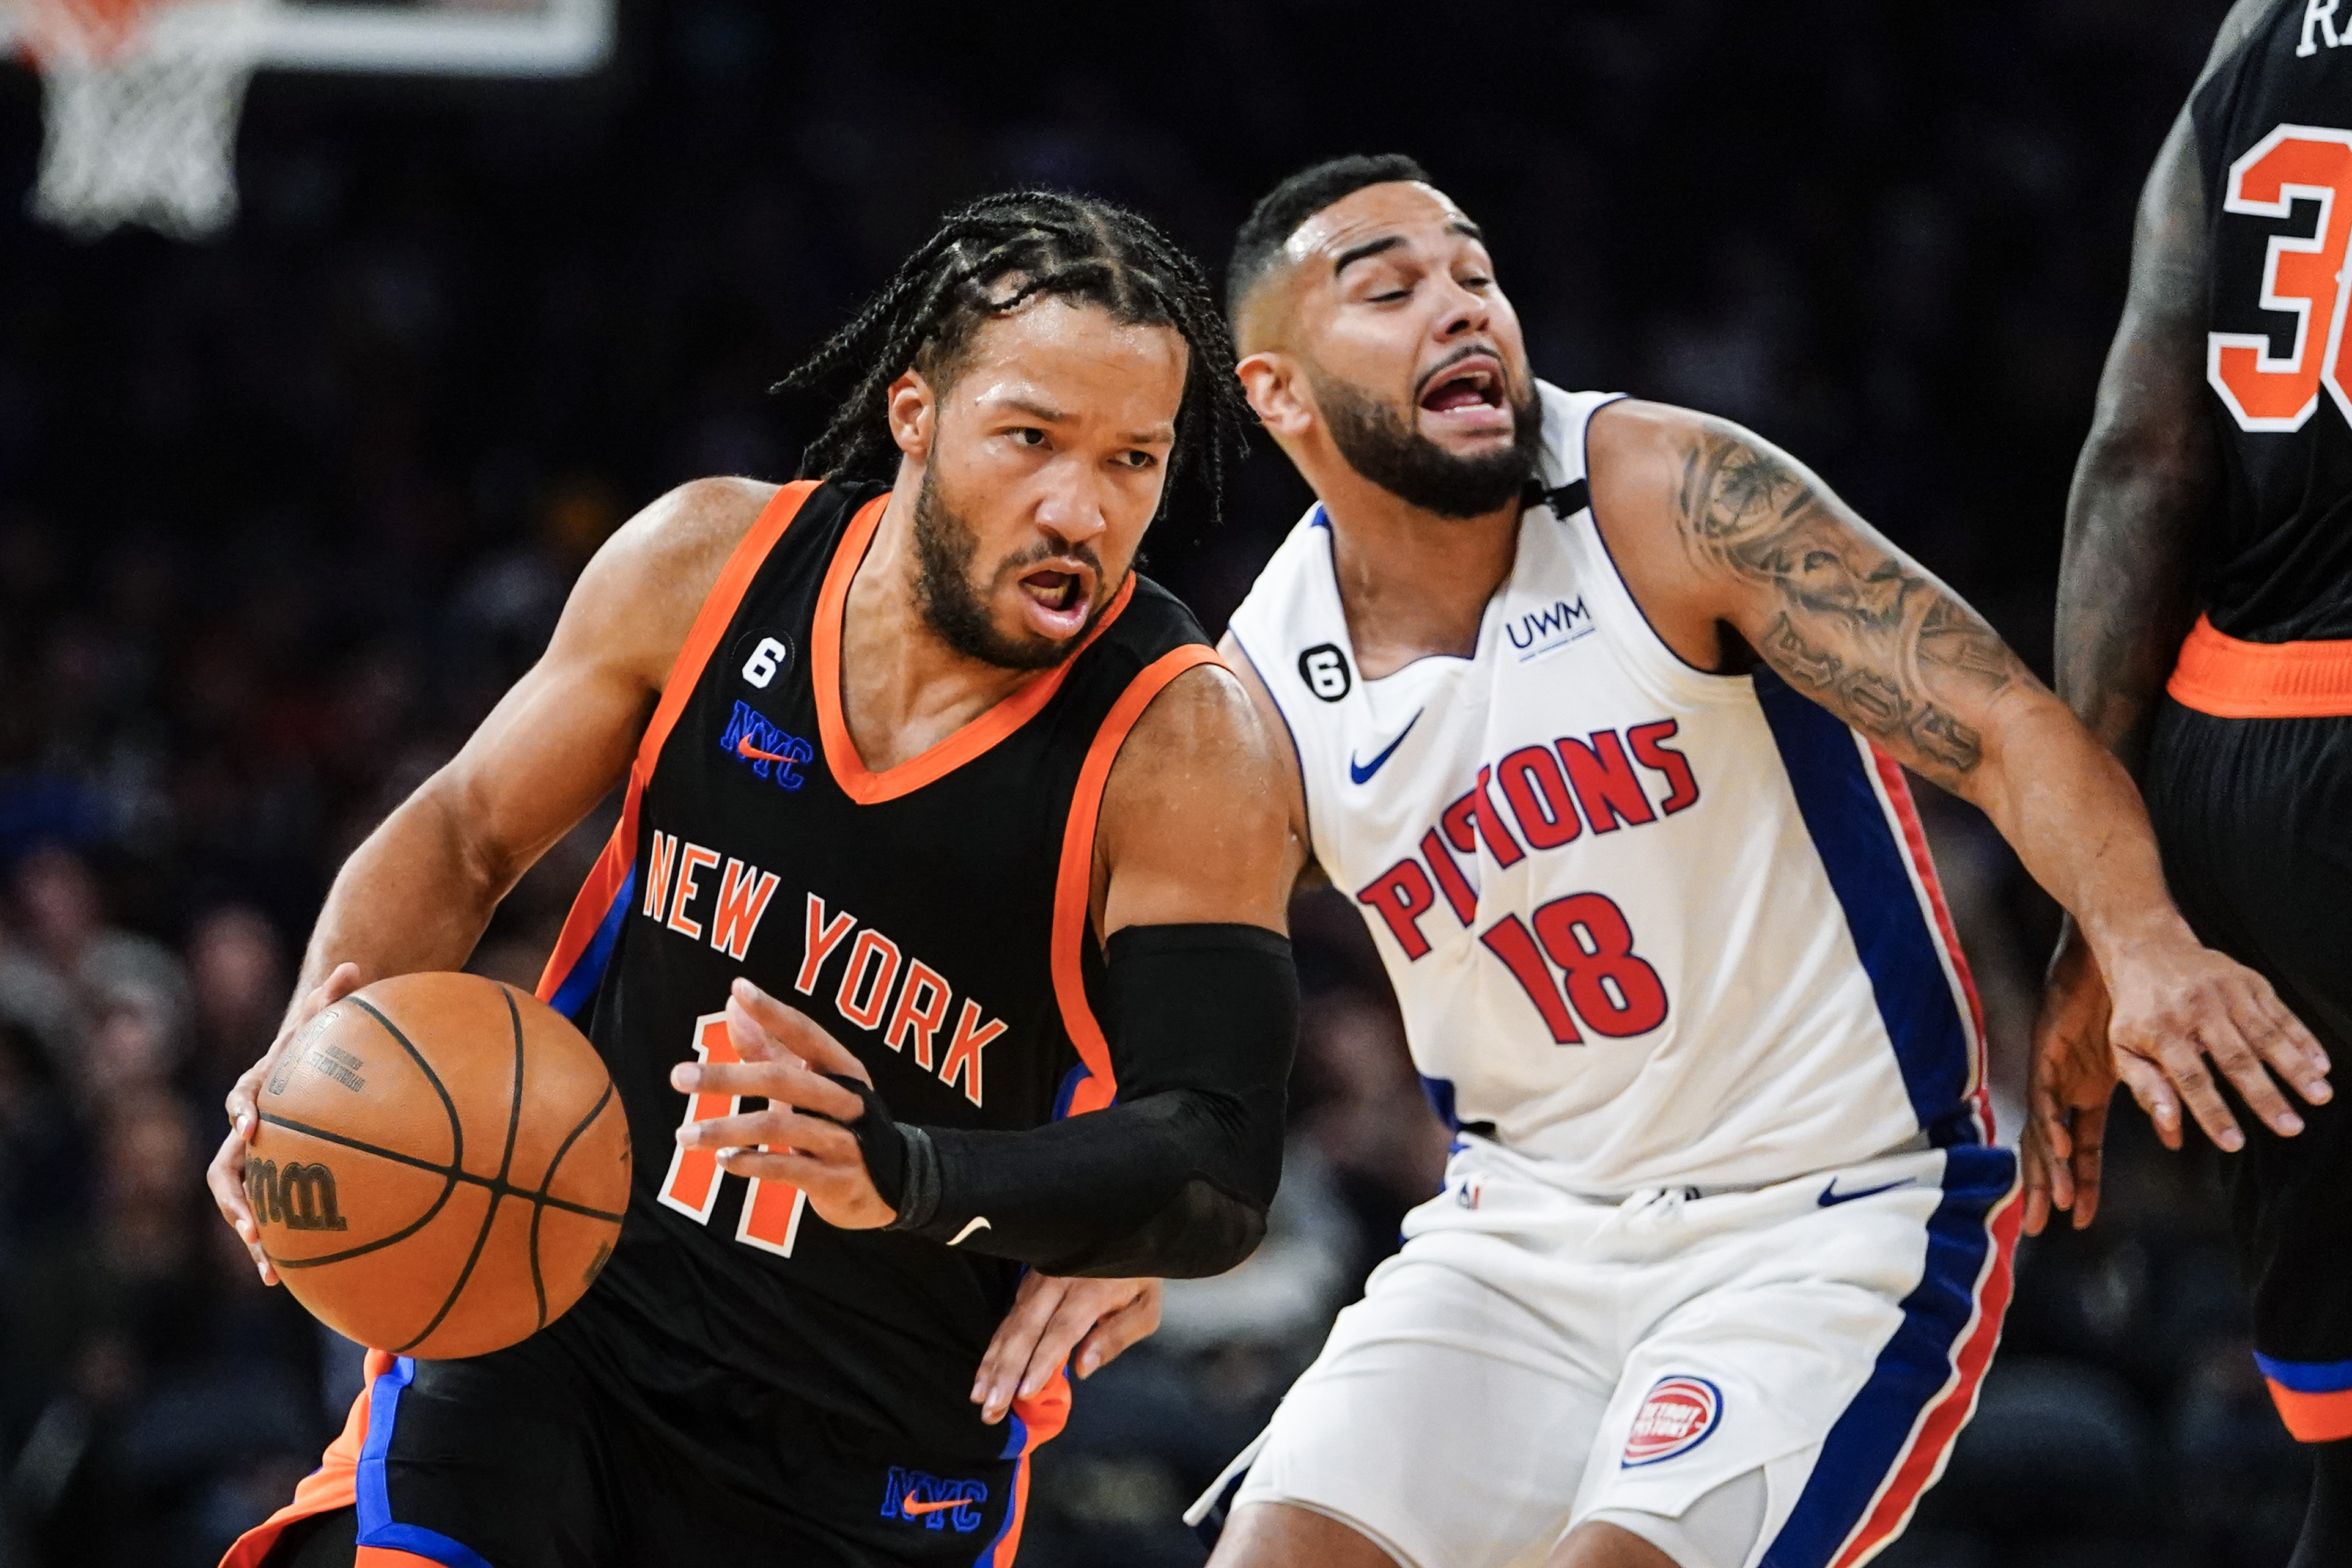 How to Watch the New York Knicks vs